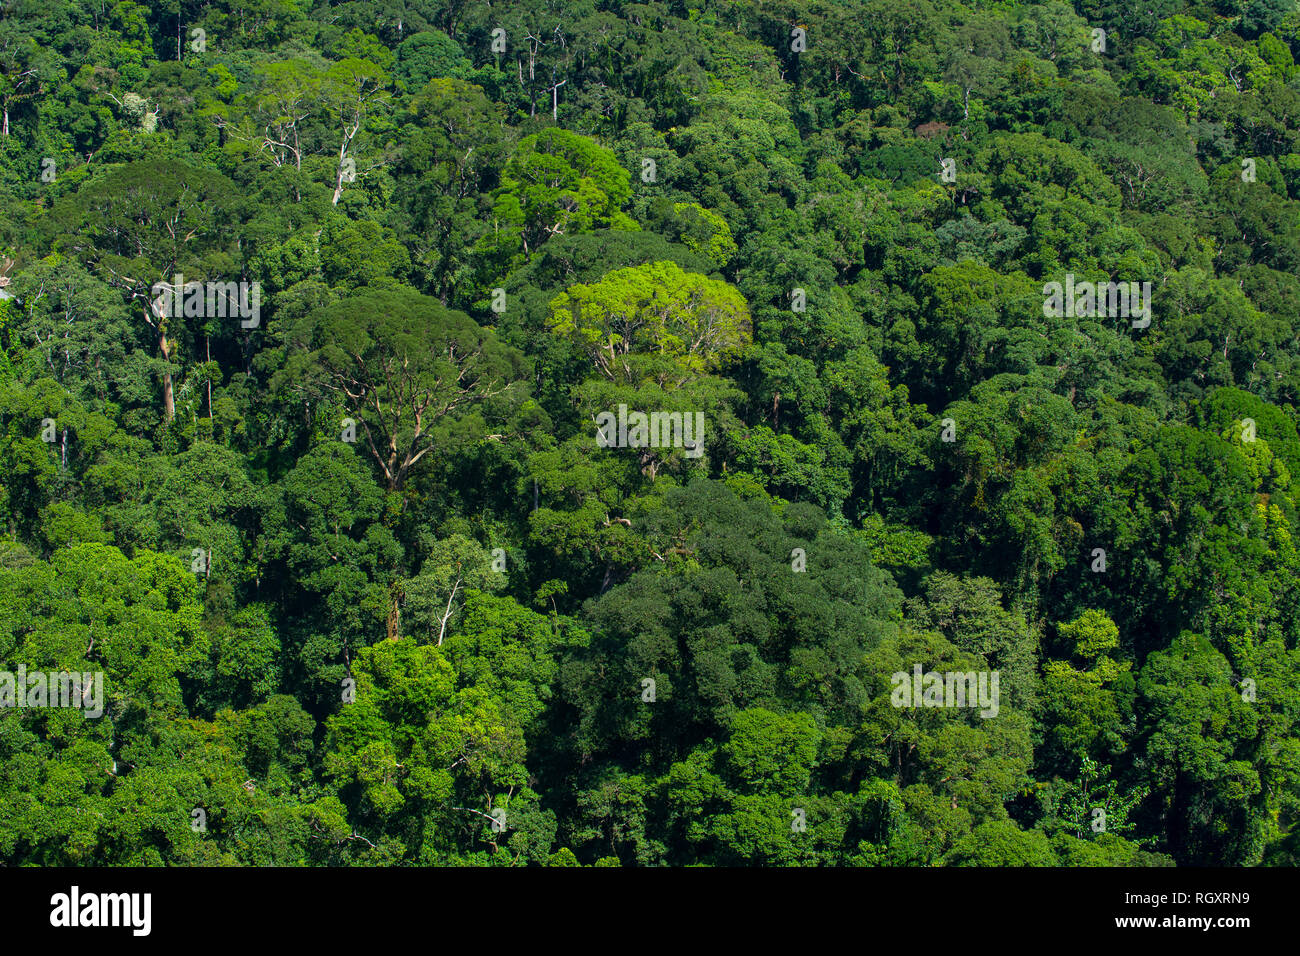 Lush, primary rainforest canopy viewed from above, in Danum Valley Rainforest, Sabah, Borneo, Malaysia. Stock Photo